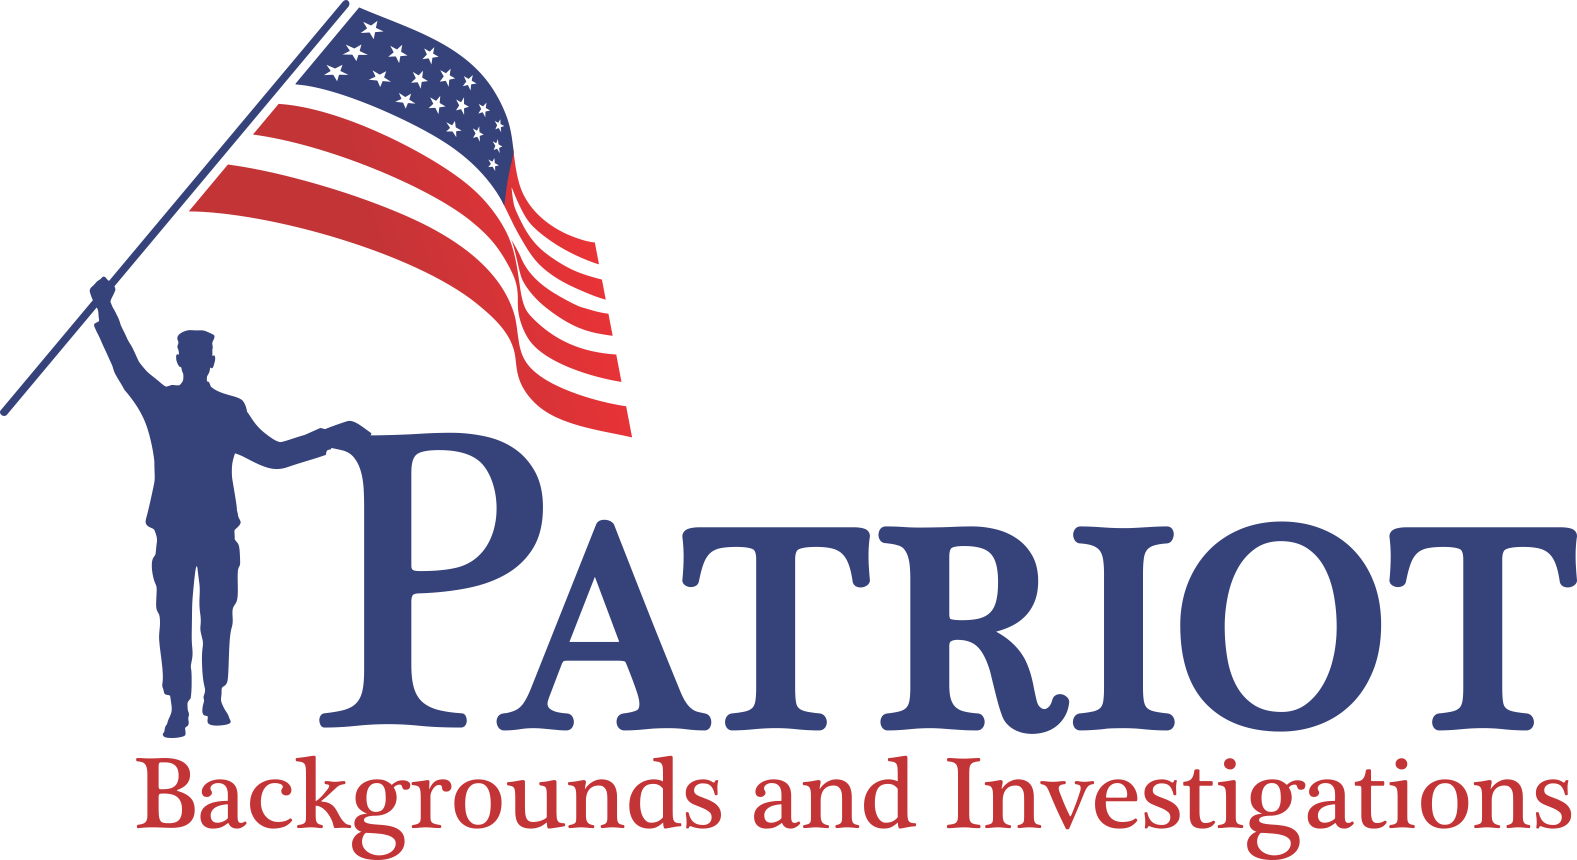 PATRIOT Backgrounds and Investigations